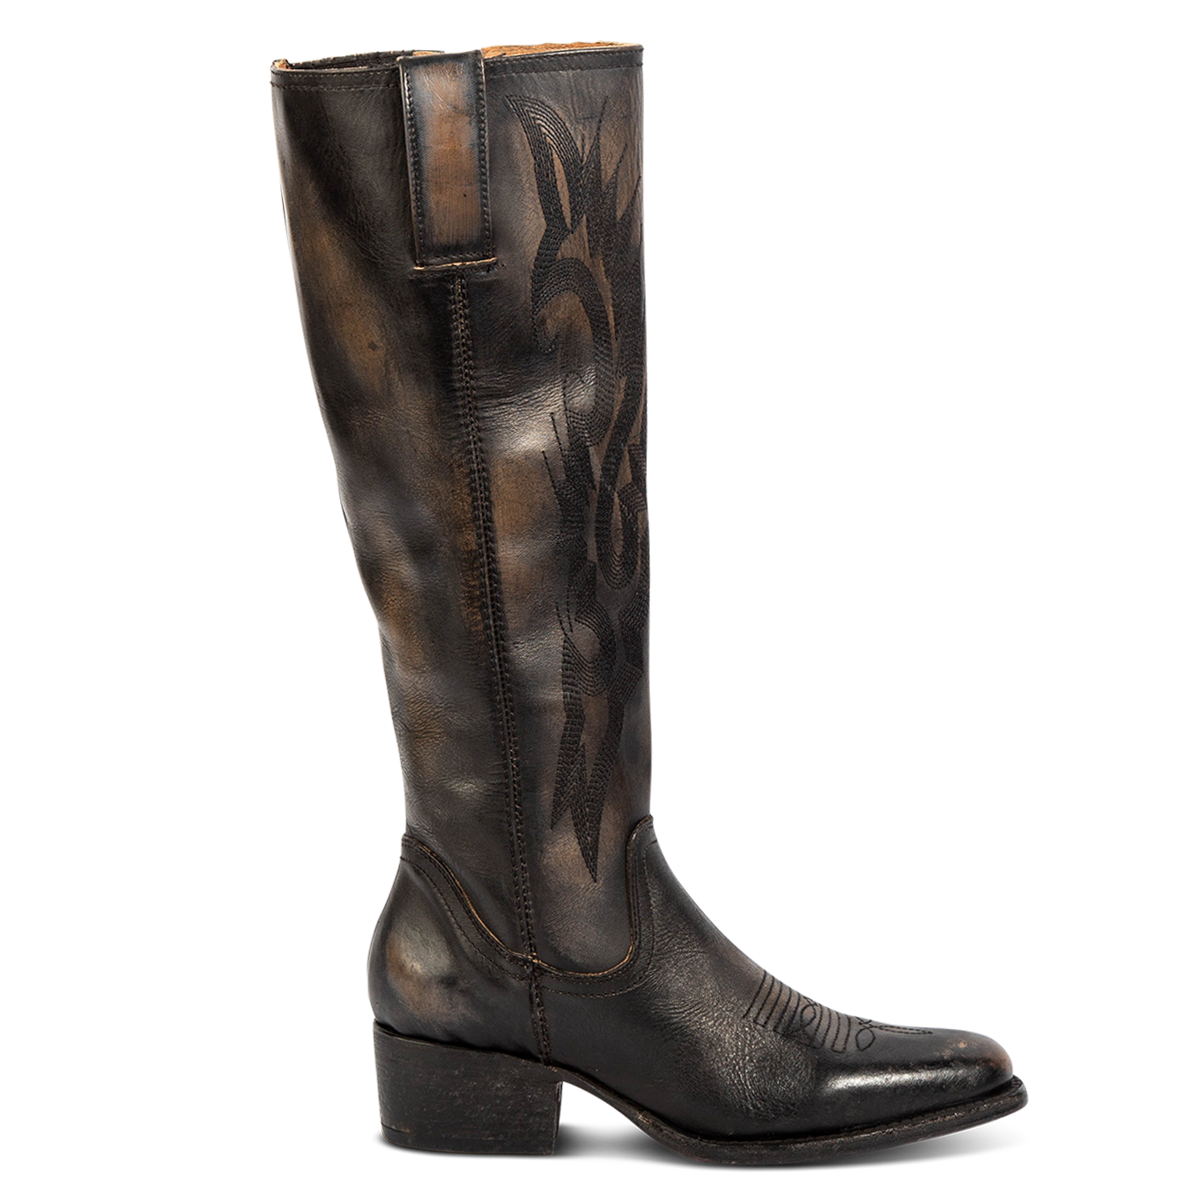 FREEBIRD women's Montana black leather boot with intricate stitching, leather pull straps and a low block heel